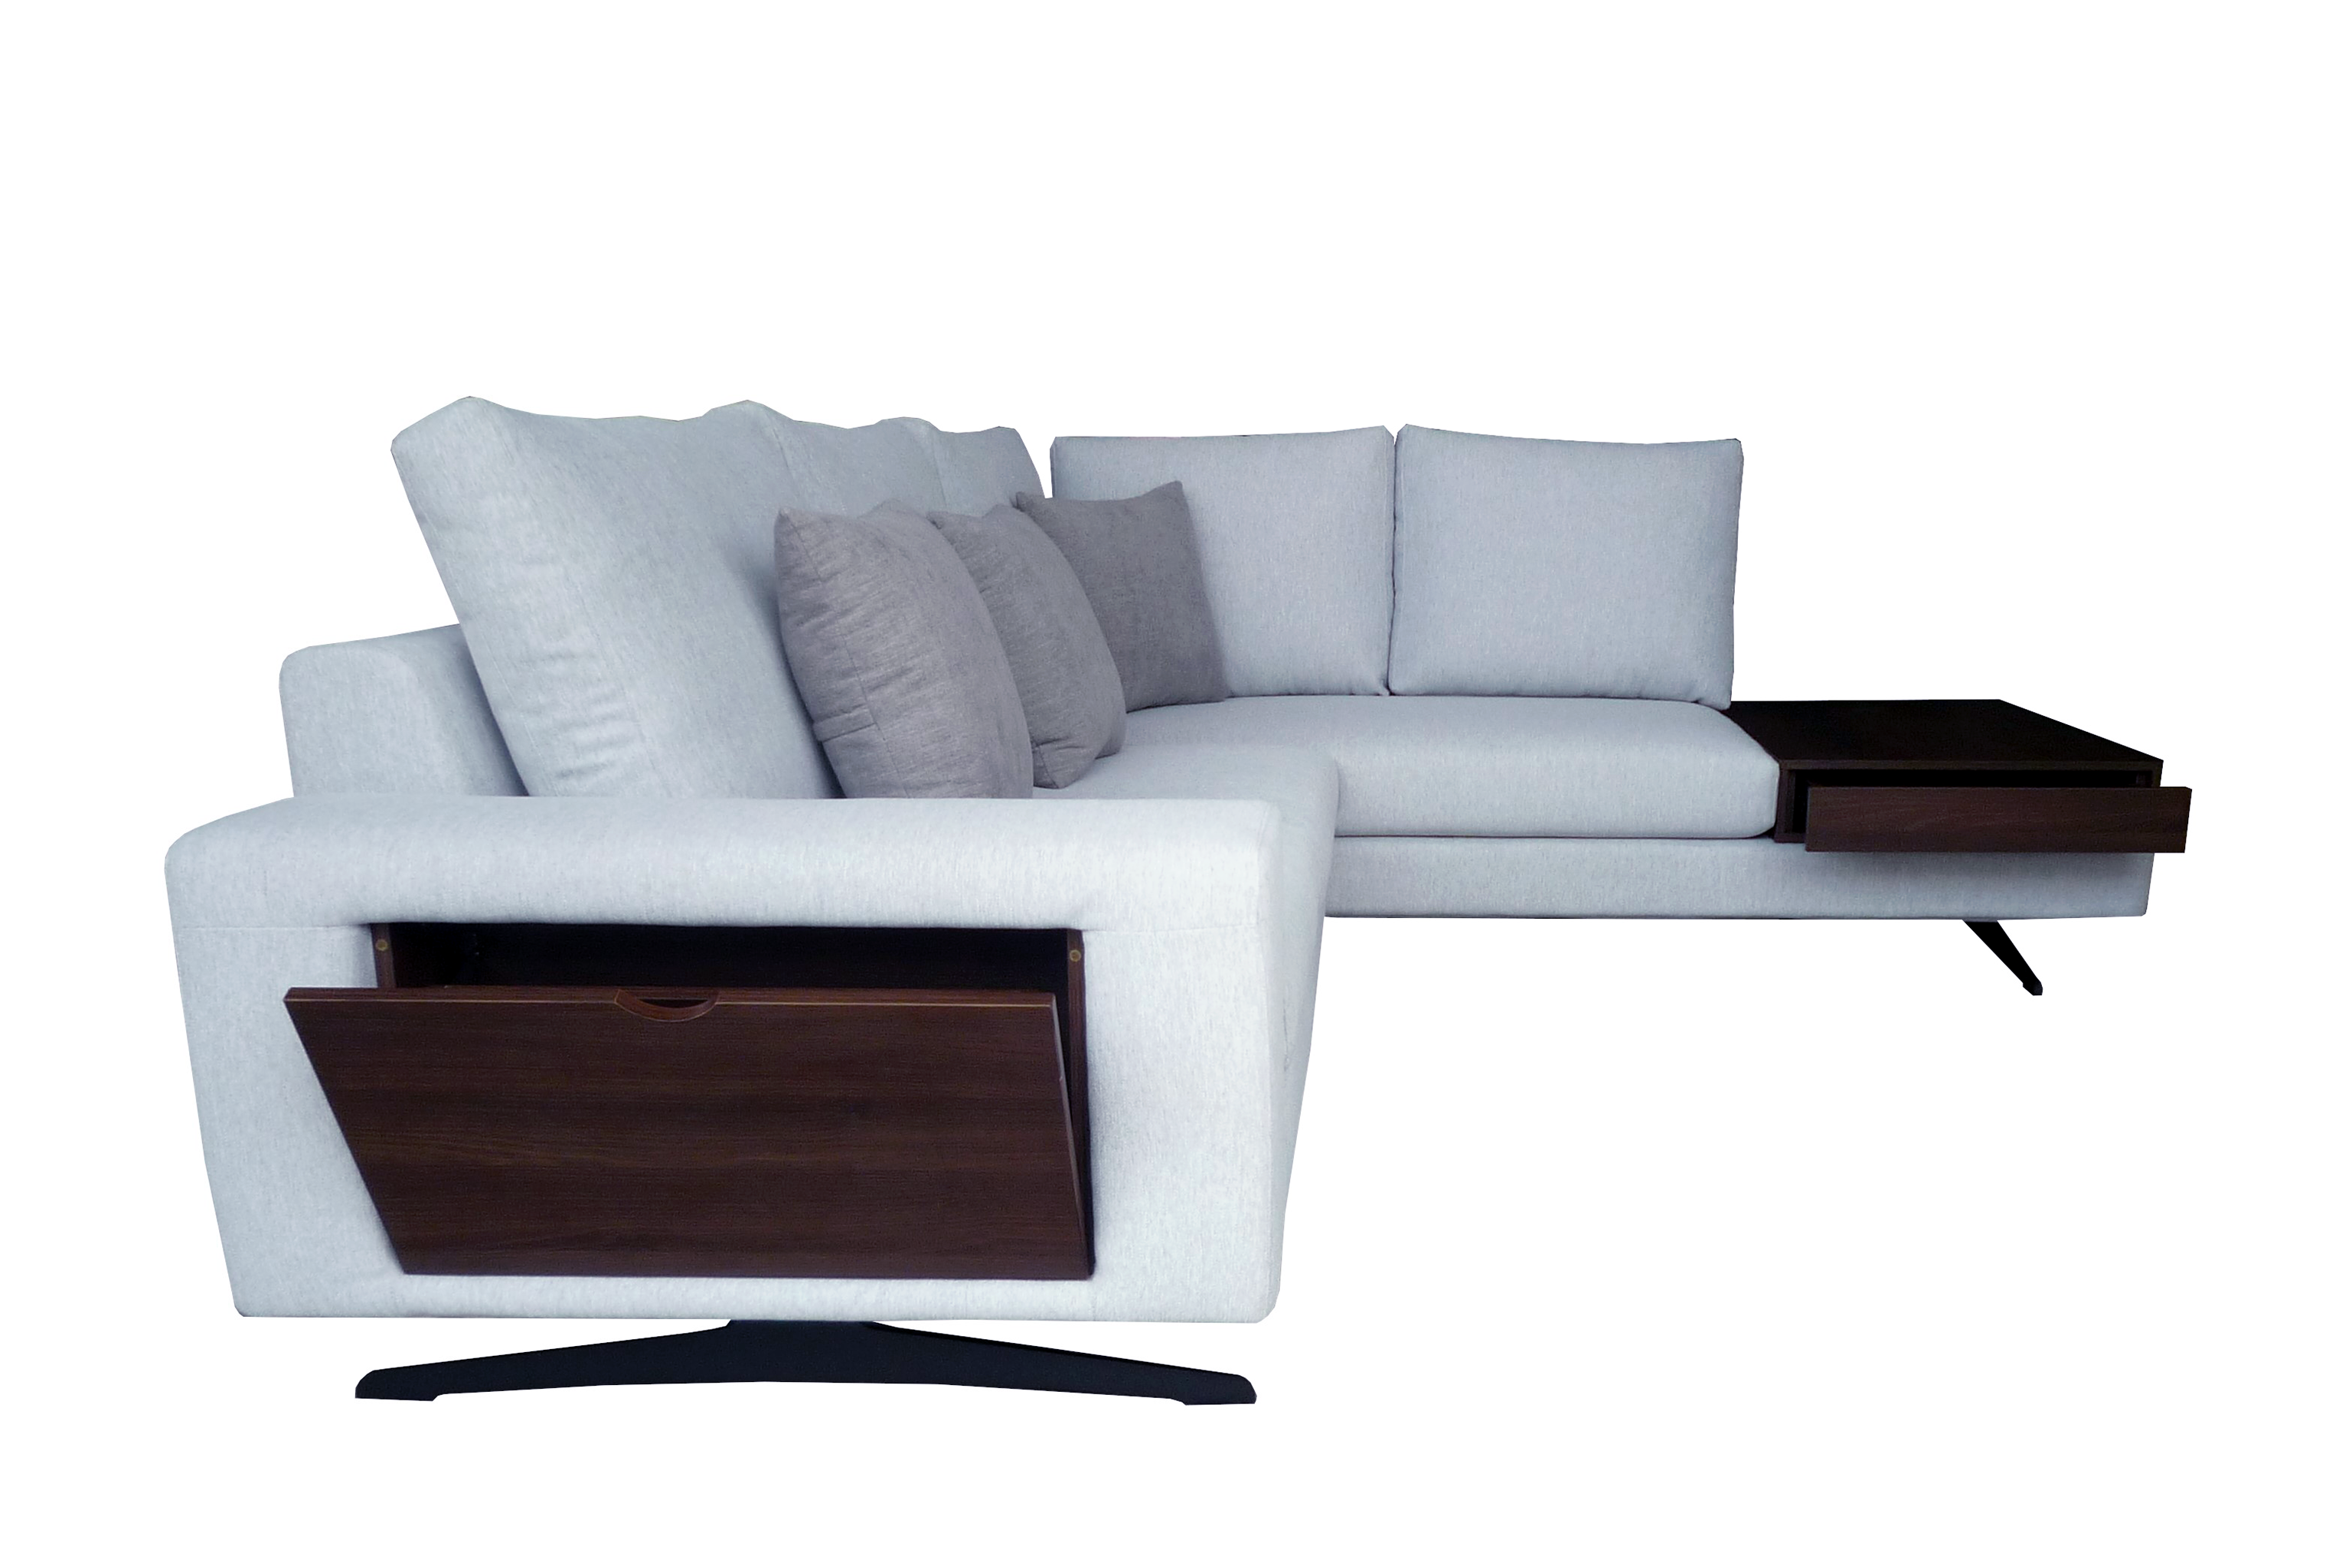 FREESIA Sectional Sofa in Fabric by Castilla